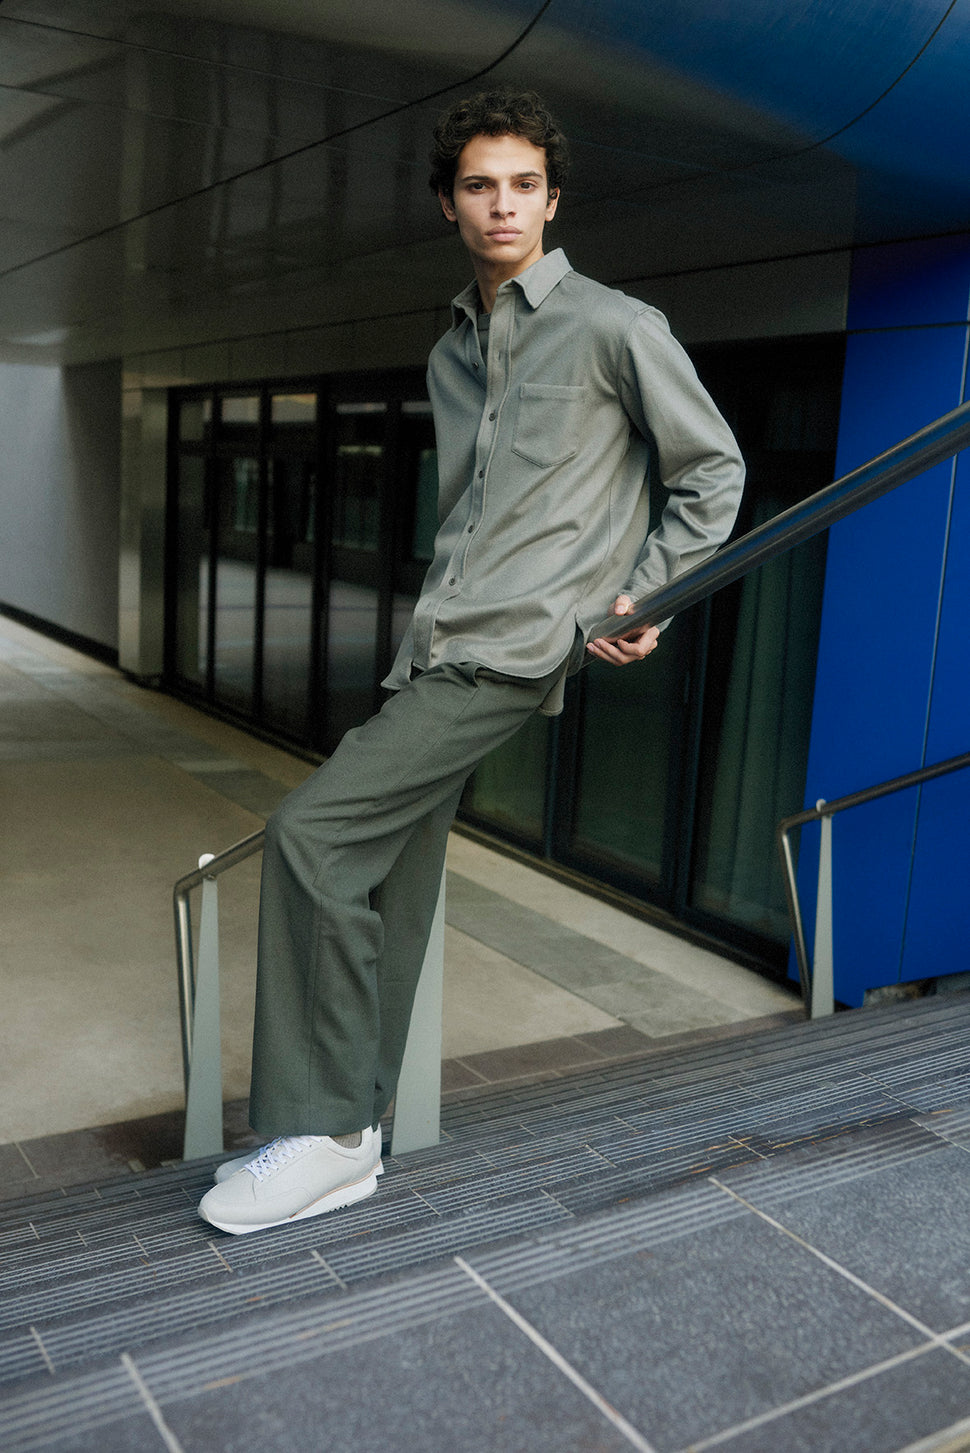 Timothee paris sneaker cabourg cotton white worn by a man with grey shirt and trousers